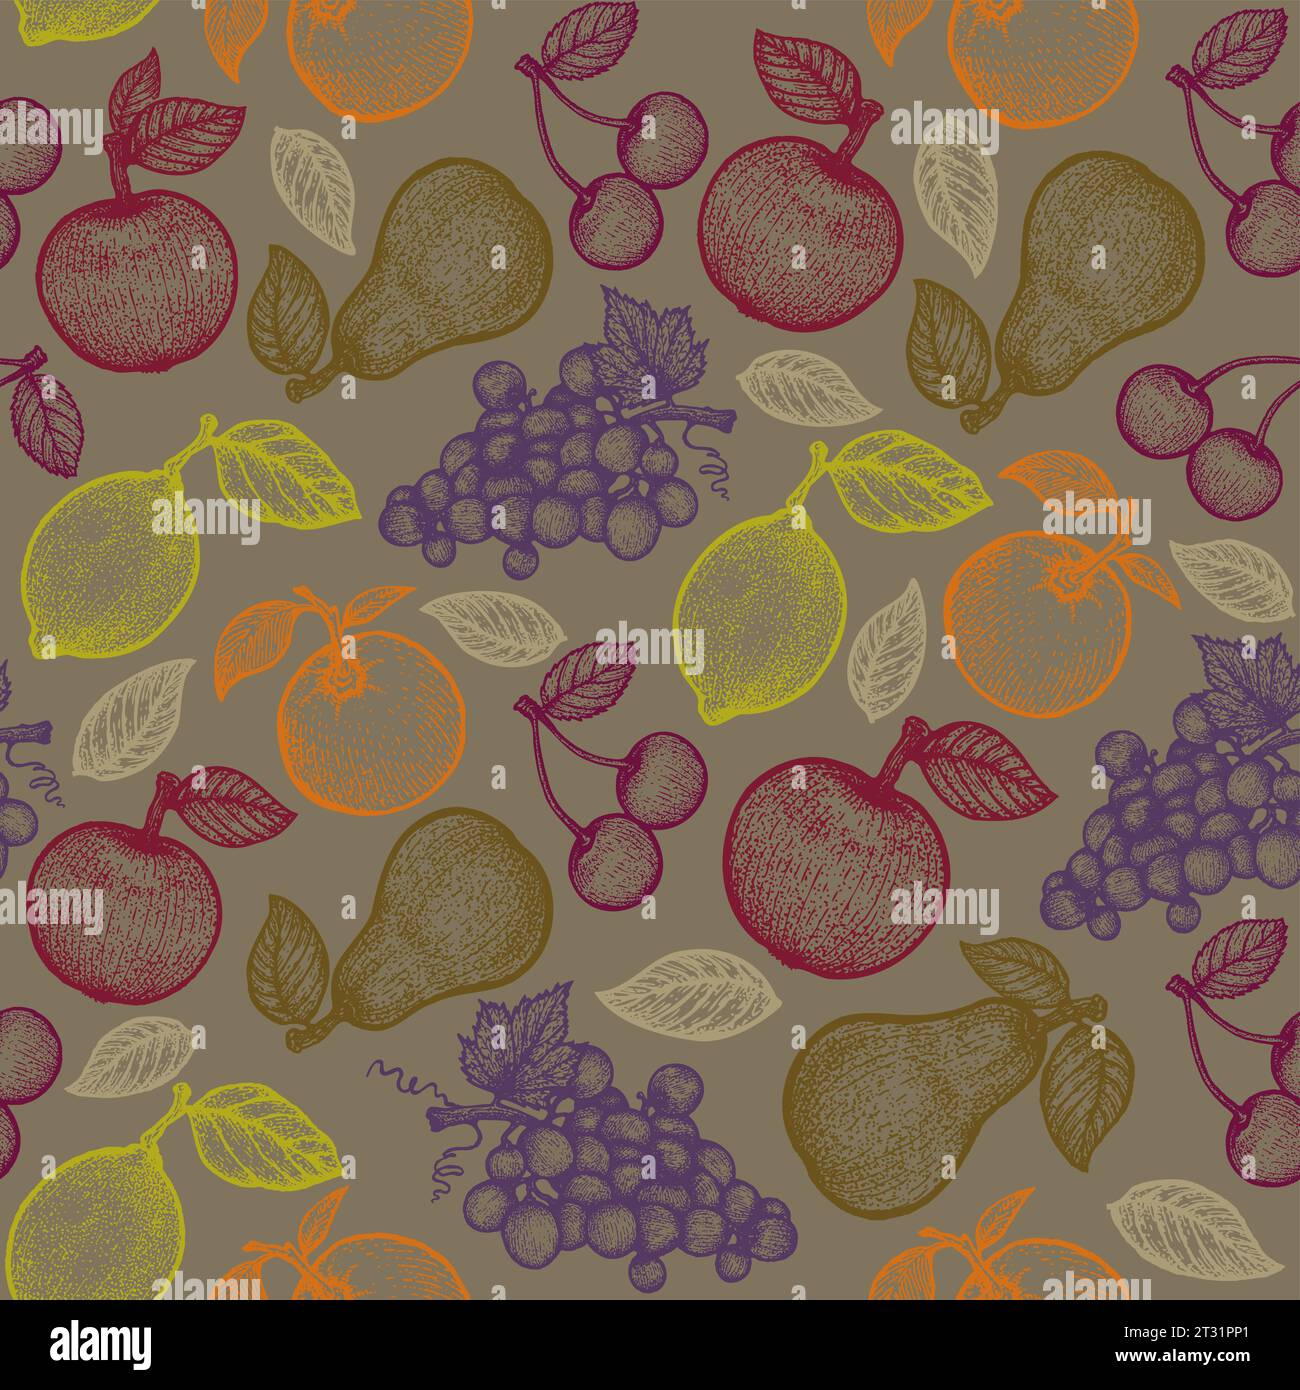 Vintage vector seamless fruit pattern in engraving style. Retro pattern with colorful fruits in retro style. Stock Vector